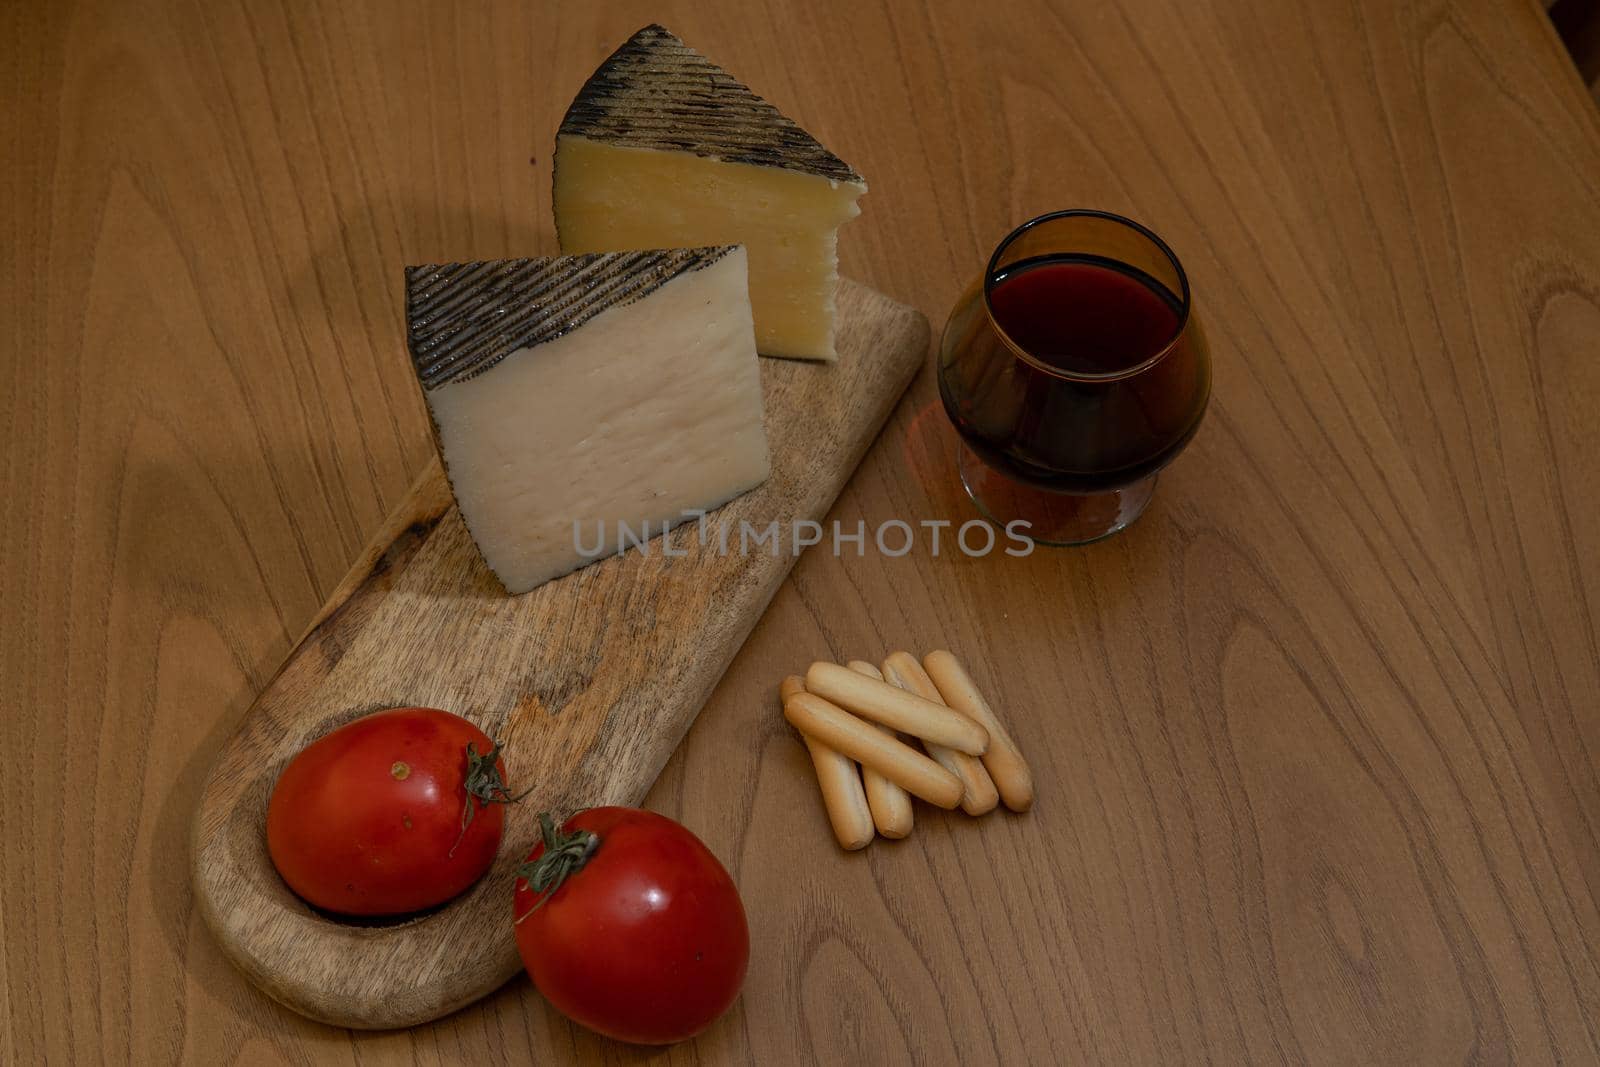 Cheese wedge with tomato, bread sticks and red wine